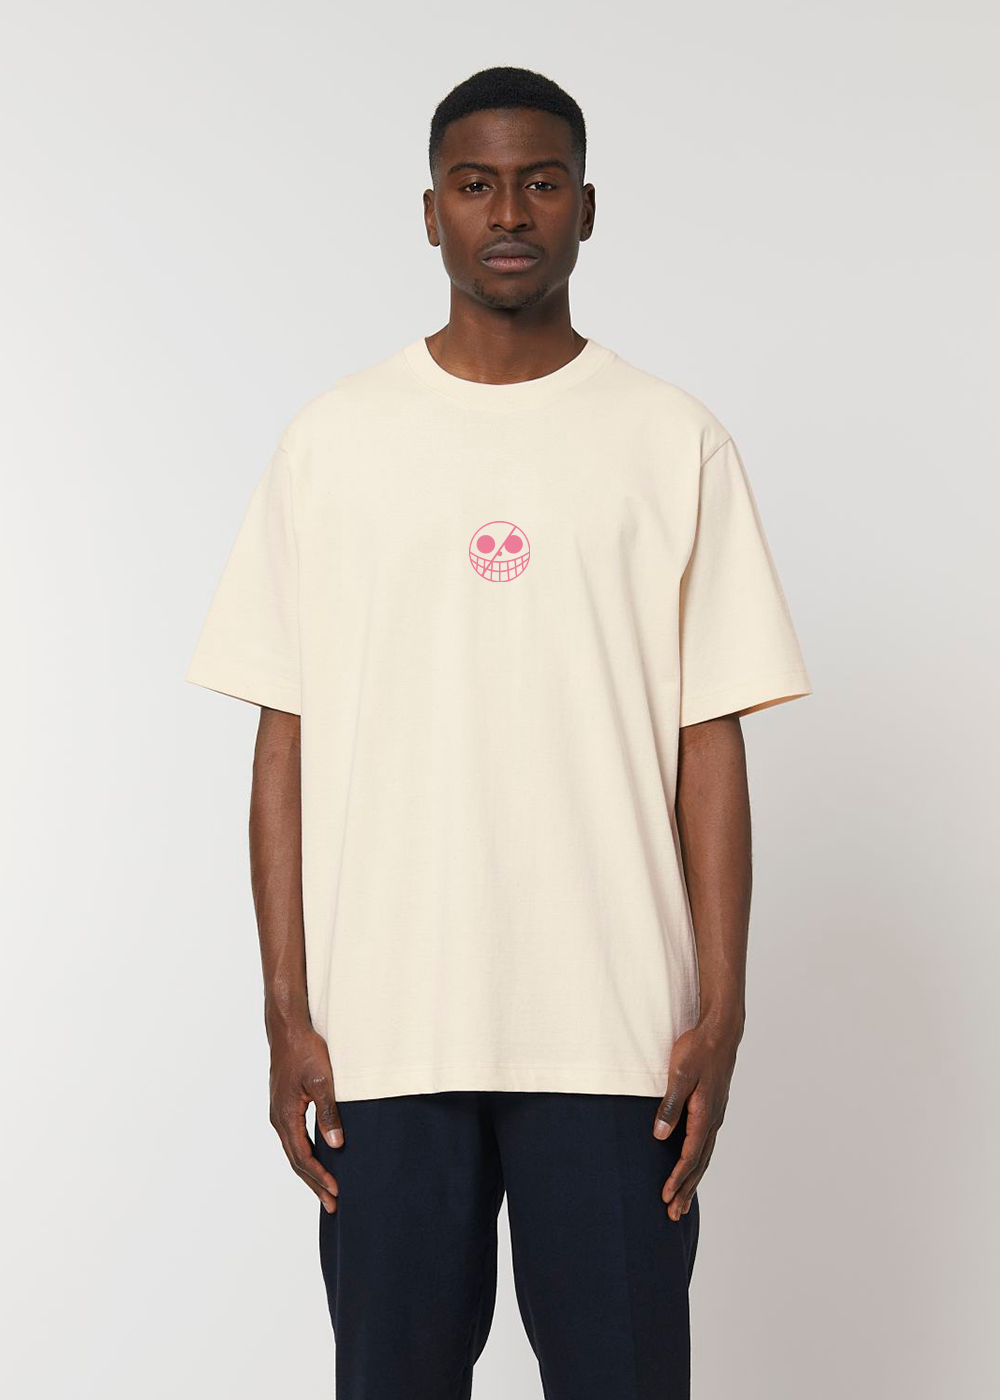 MADE IN JAPAN - THE HEAVENLY DEMON® BEIGE T-SHIRT